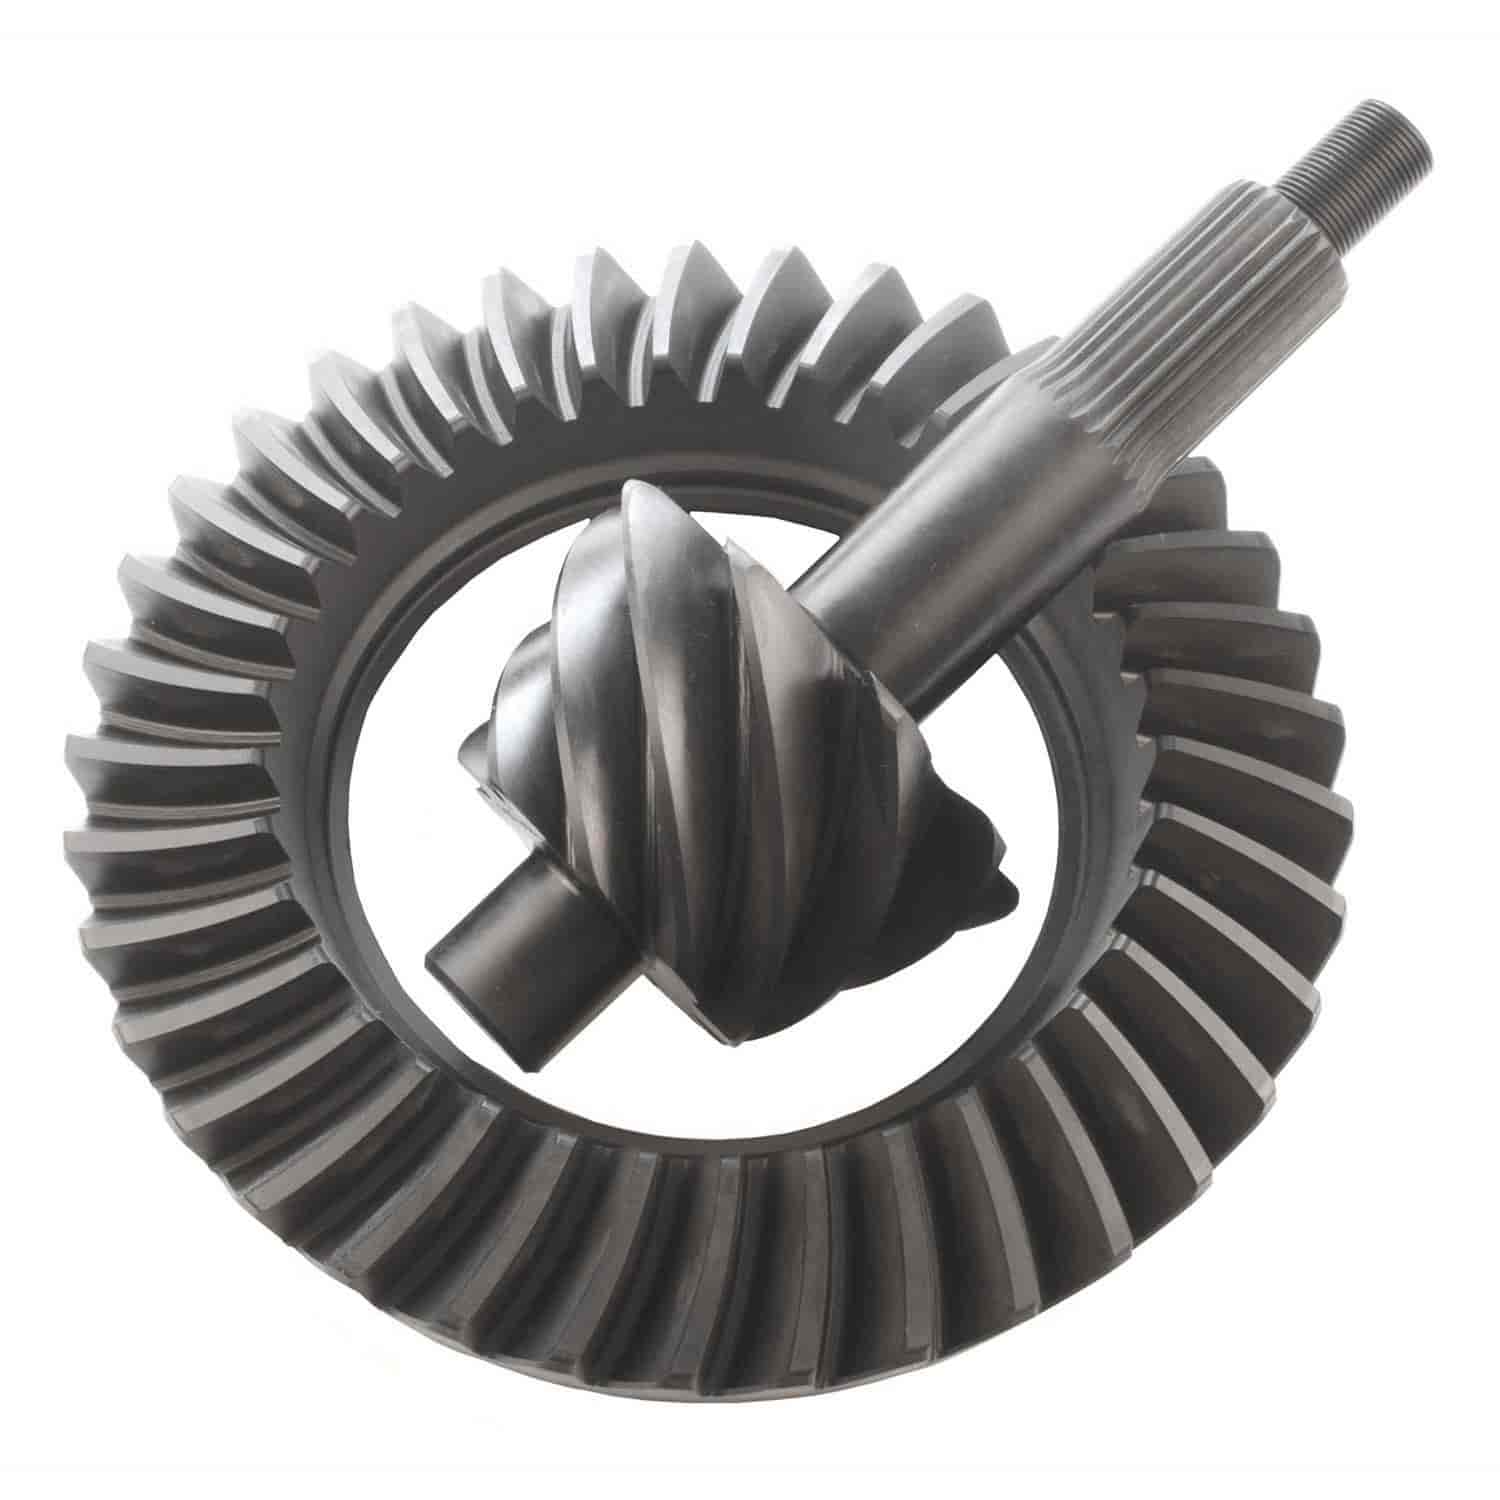 Excel Ring & Pinion Gear Set Ford 9" Ratio: 4.11